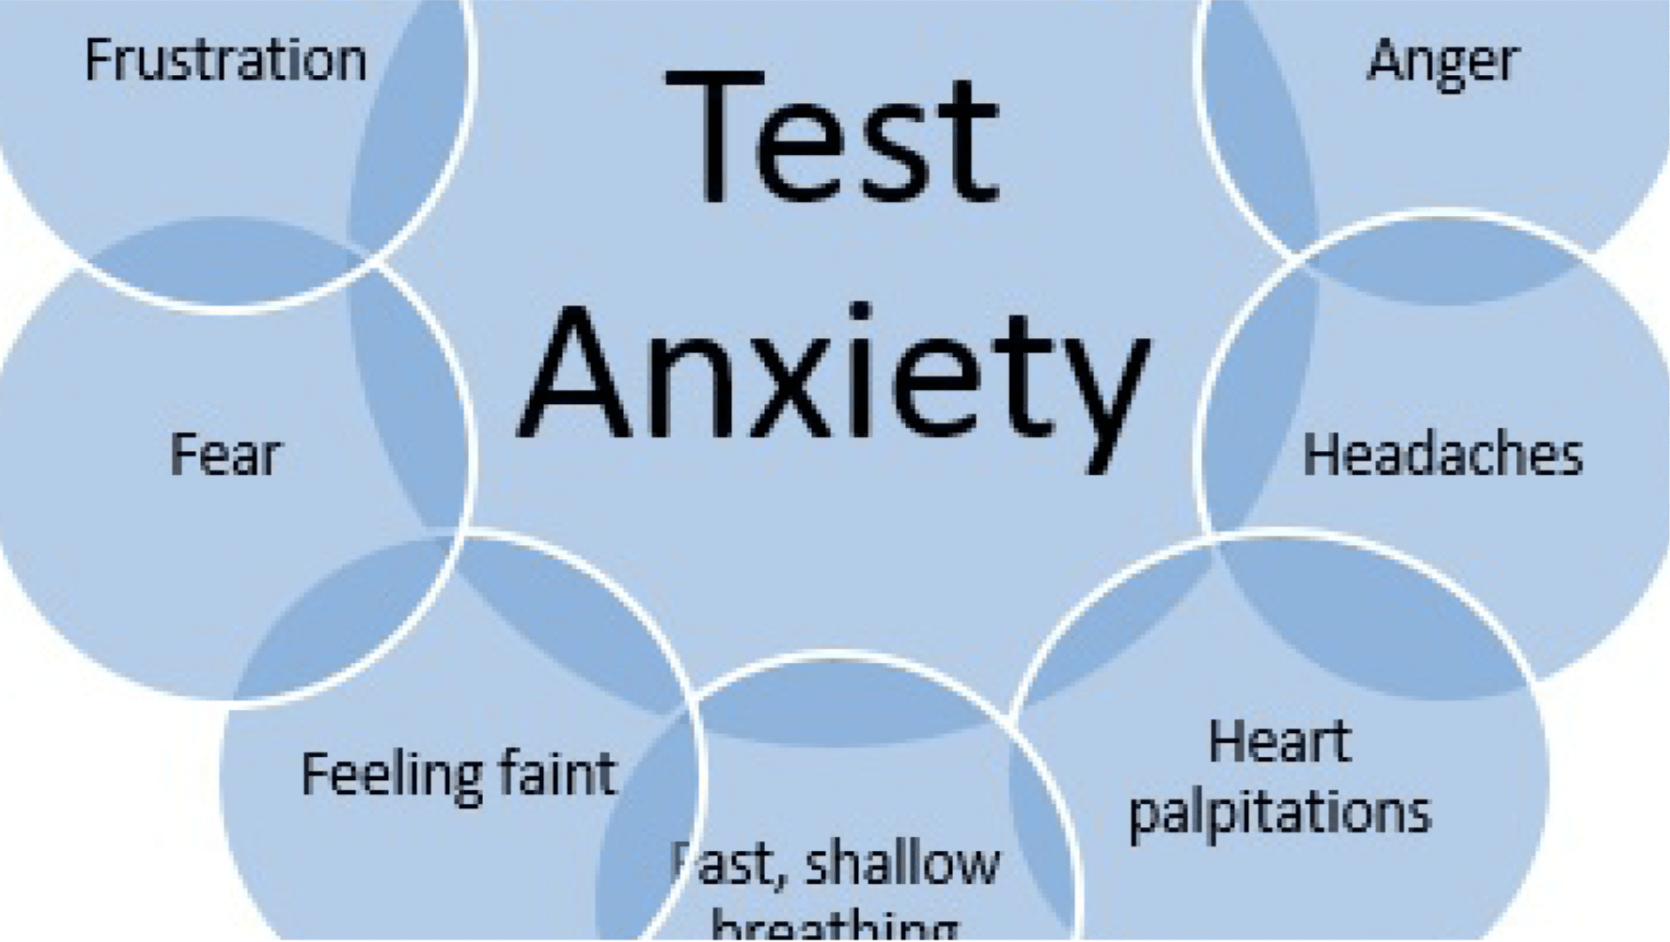 Self Test “The Burns Anxiety Inventory”